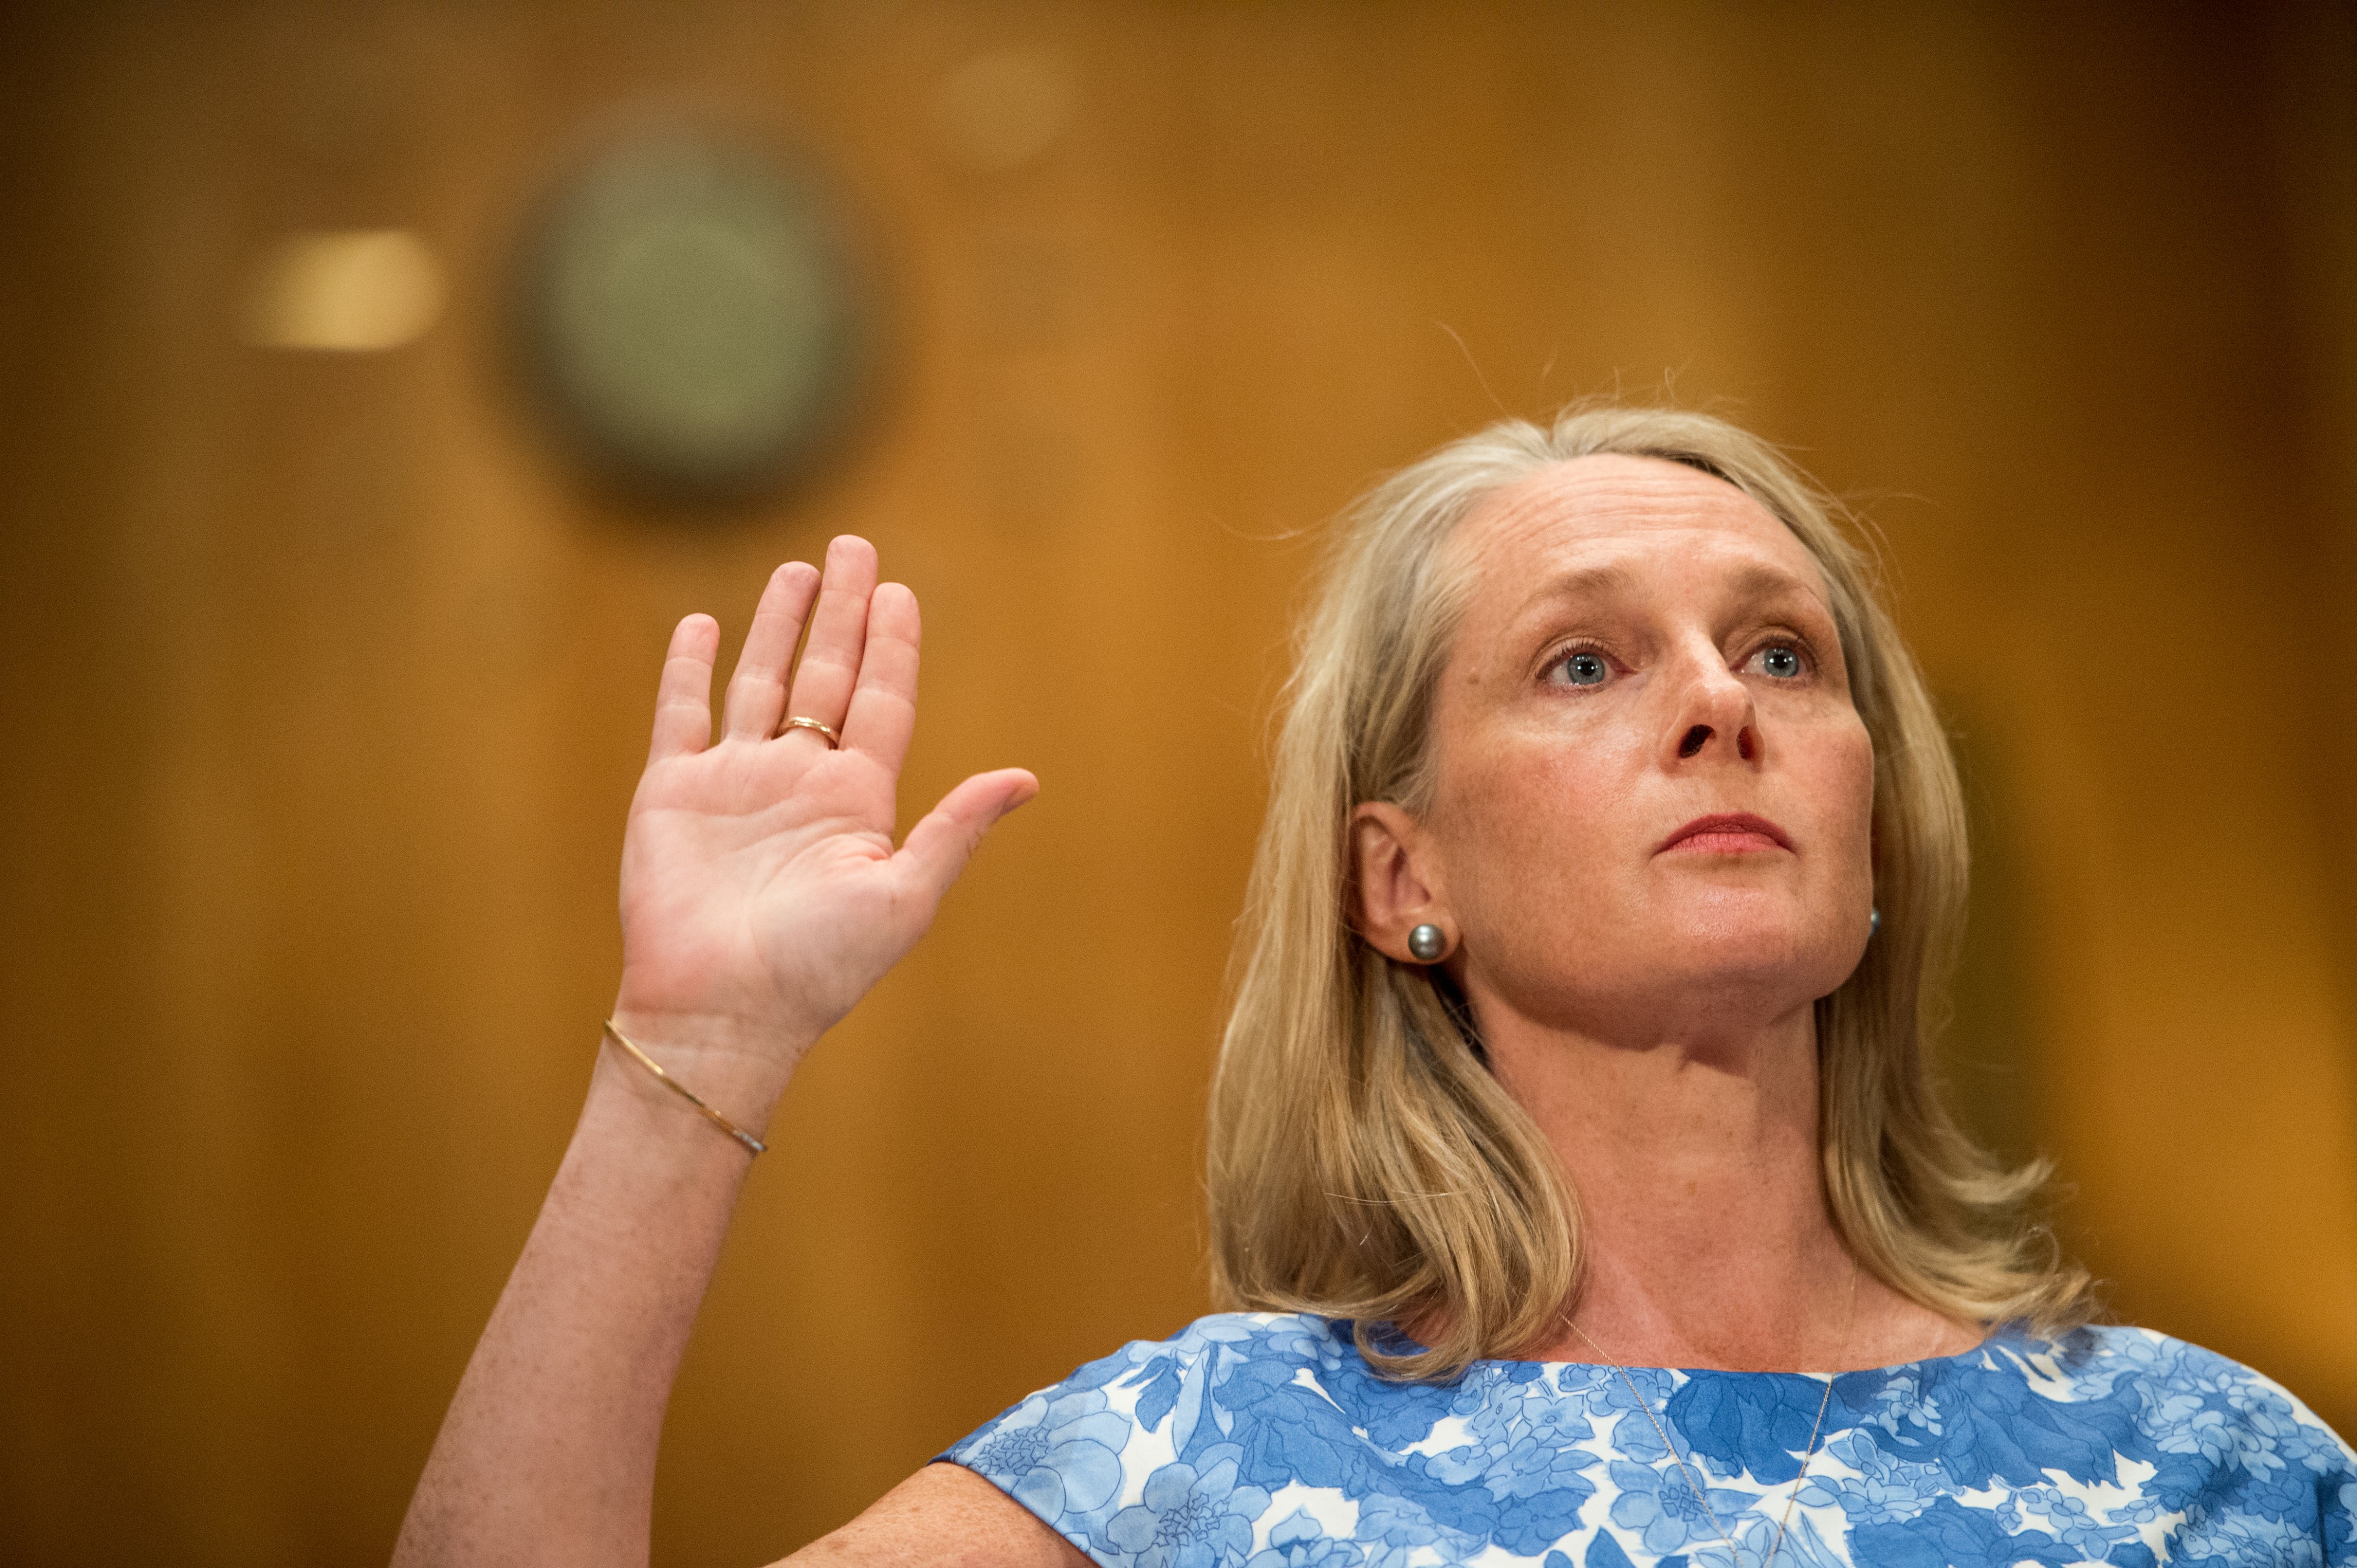 Piper Kerman, author of <i>Orange is the New Black: My Year in a Women's Prison</i>, is sworn in before testifying during the Senate Homeland Security and Governmental Affairs Committee hearing on "Oversight of the Bureau of Prisons: First-Hand Accounts of Challenges Facing the Federal Prison System" on Tuesday, Aug. 4, 2015. (Bill Clark—AP)